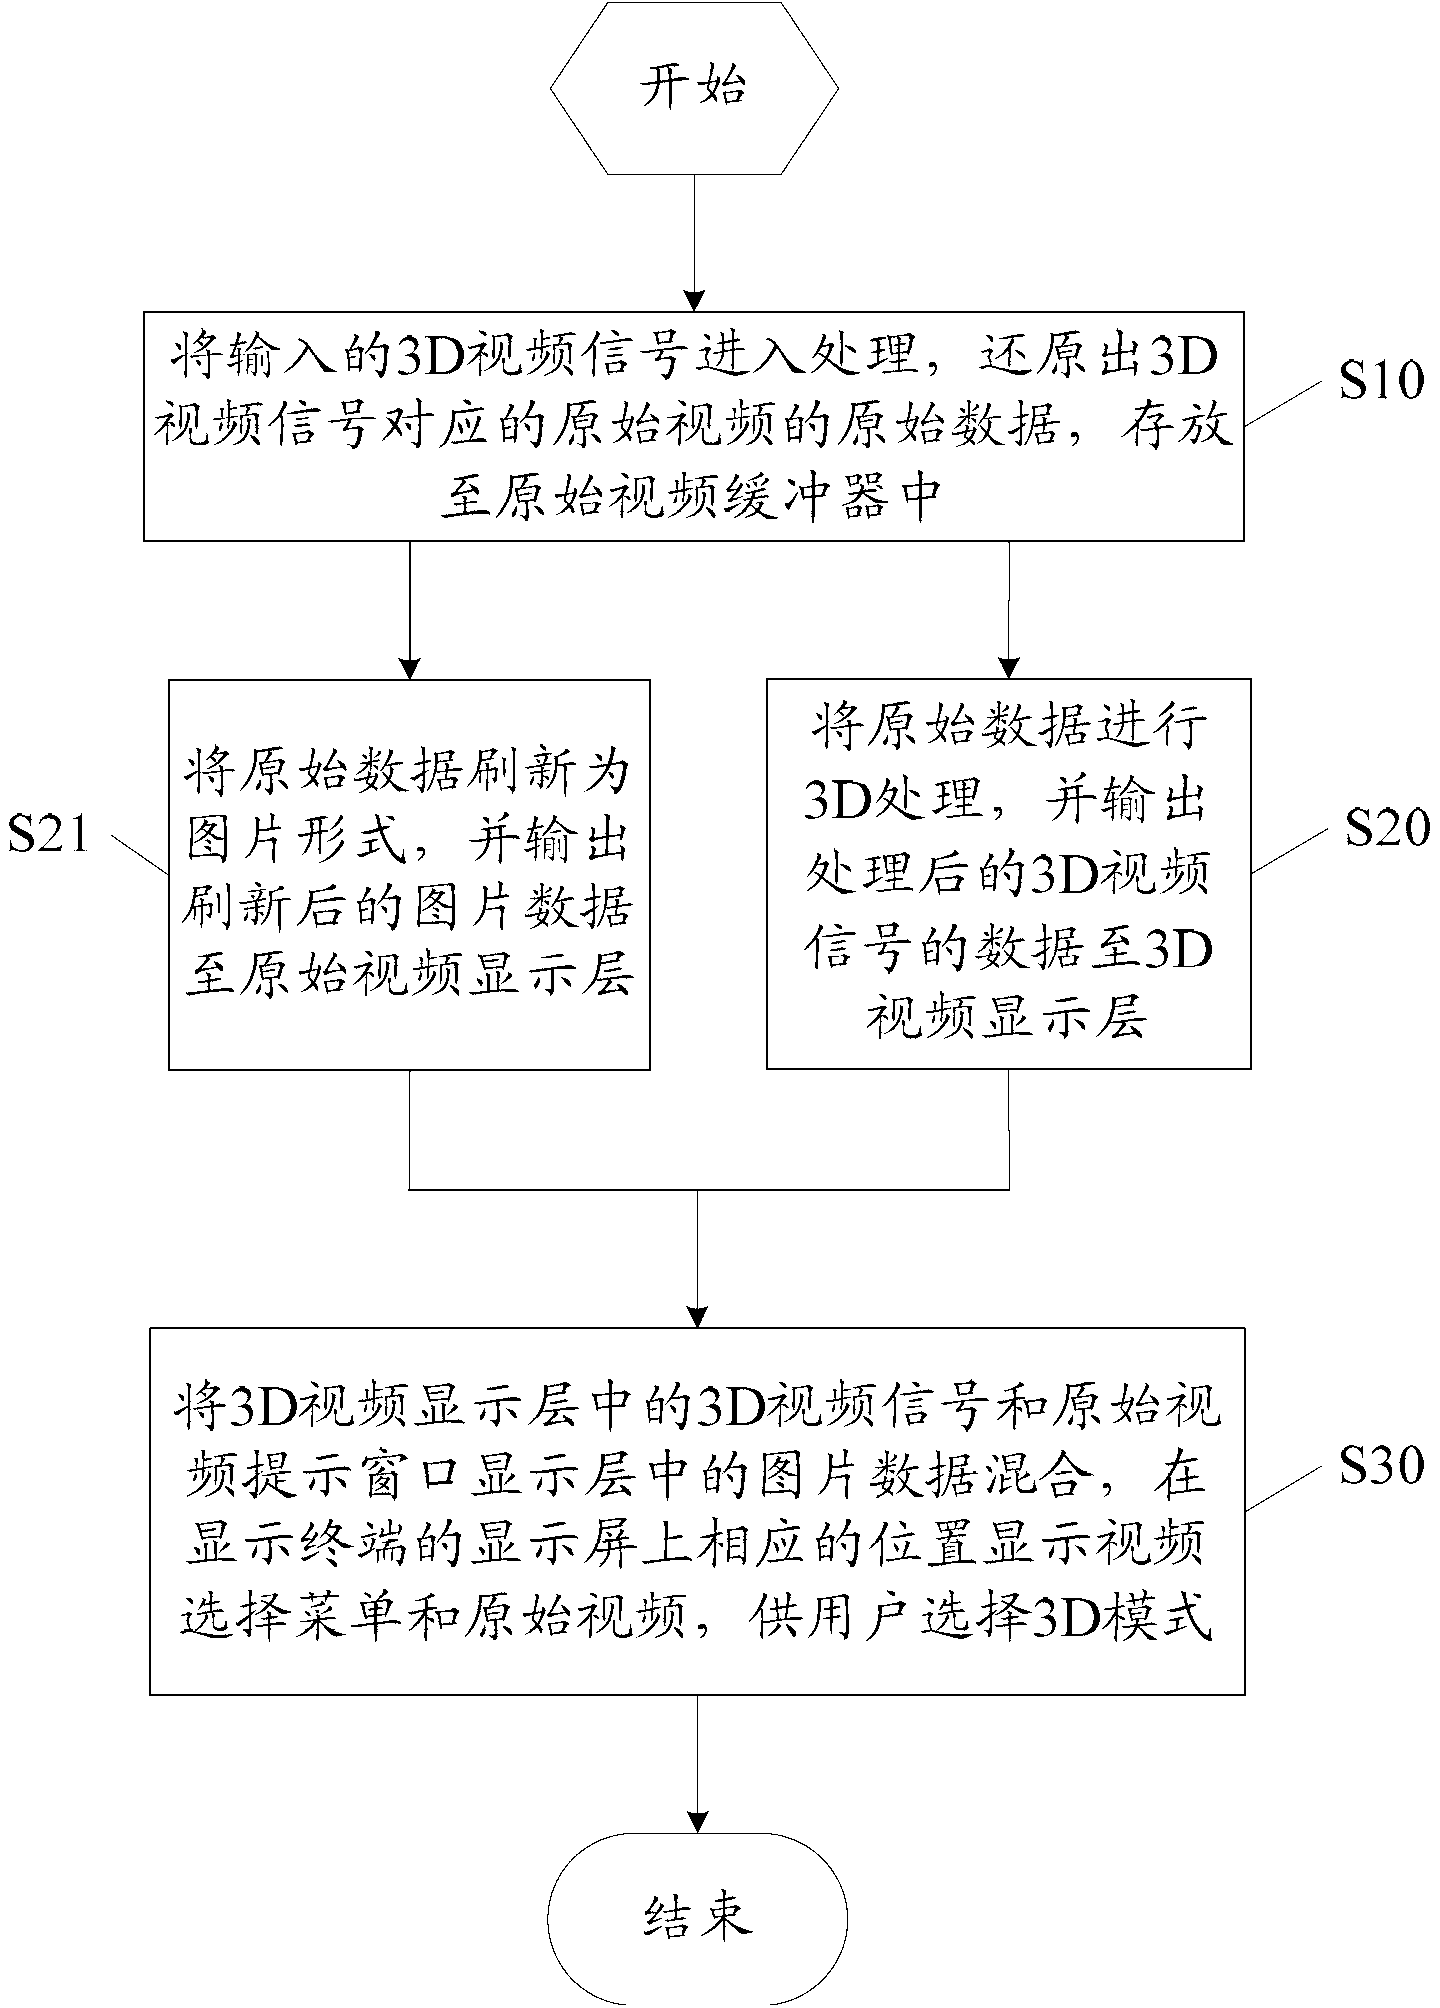 Method and device for selecting three-dimensional (3D) mode on basis of original video